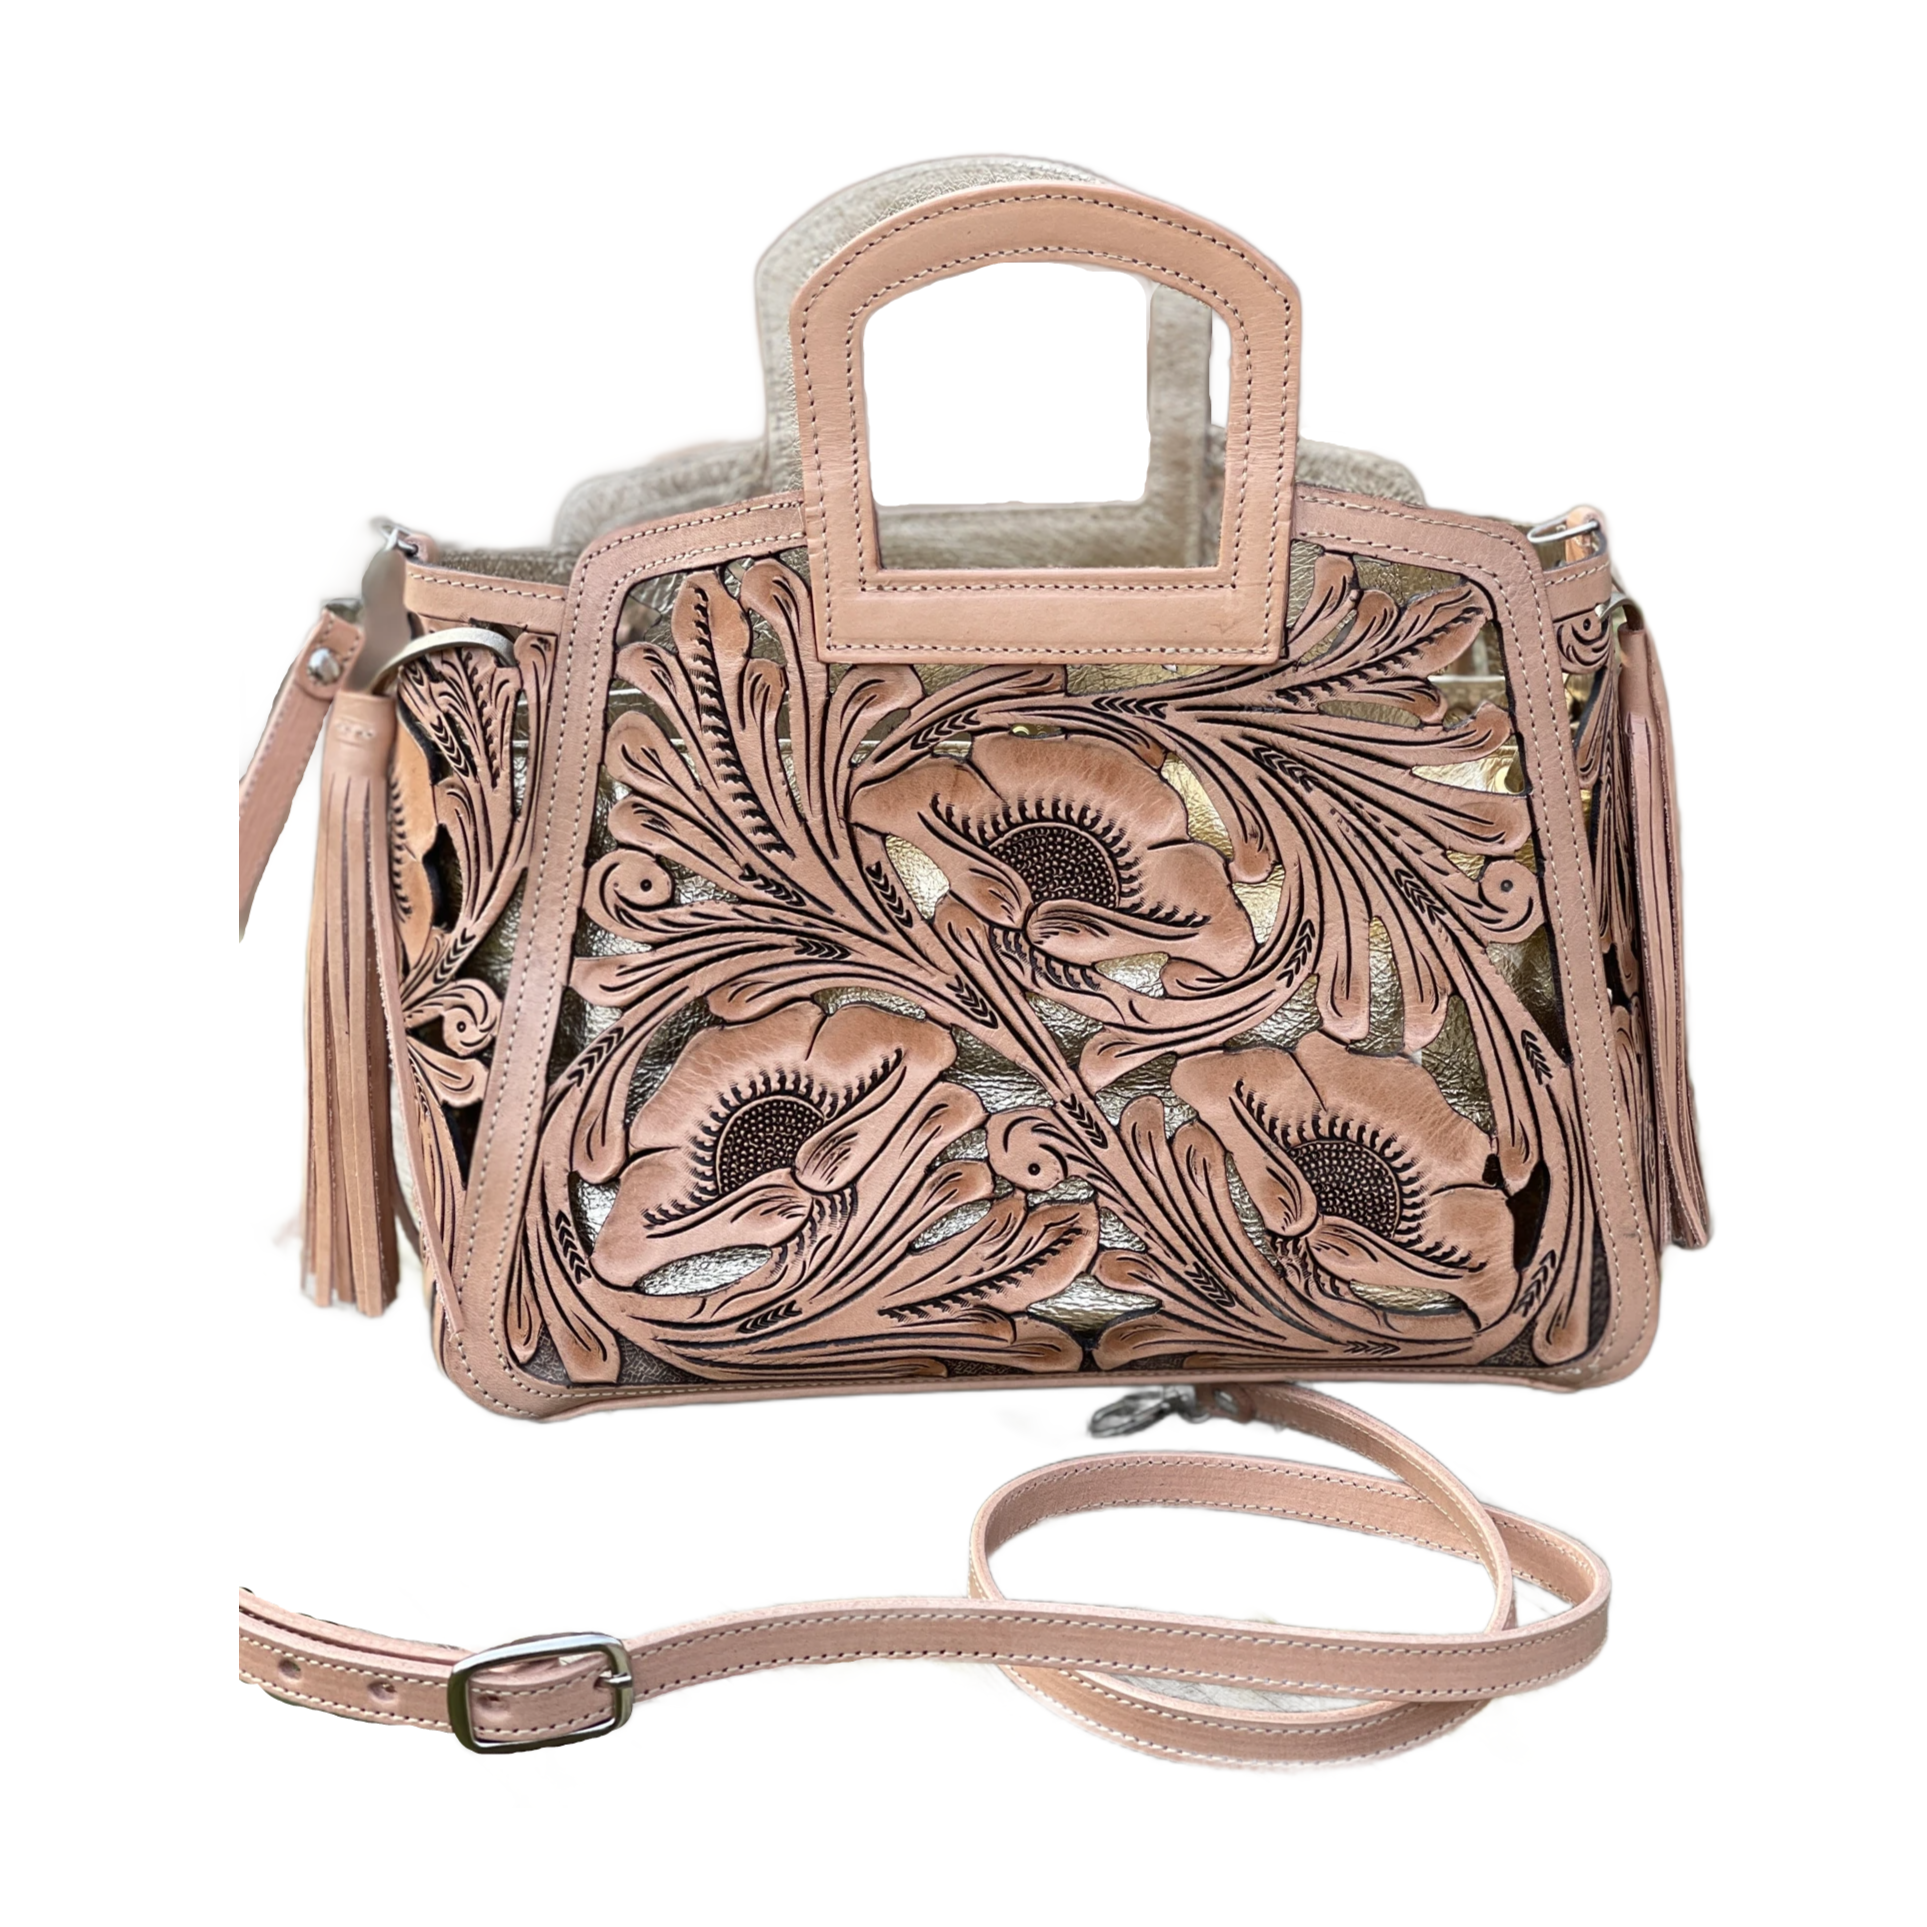 Hand tooled Cut-Out Tooling Leather Small Tote "NOTA FLORAL" by ALLE - ALLE Handbags